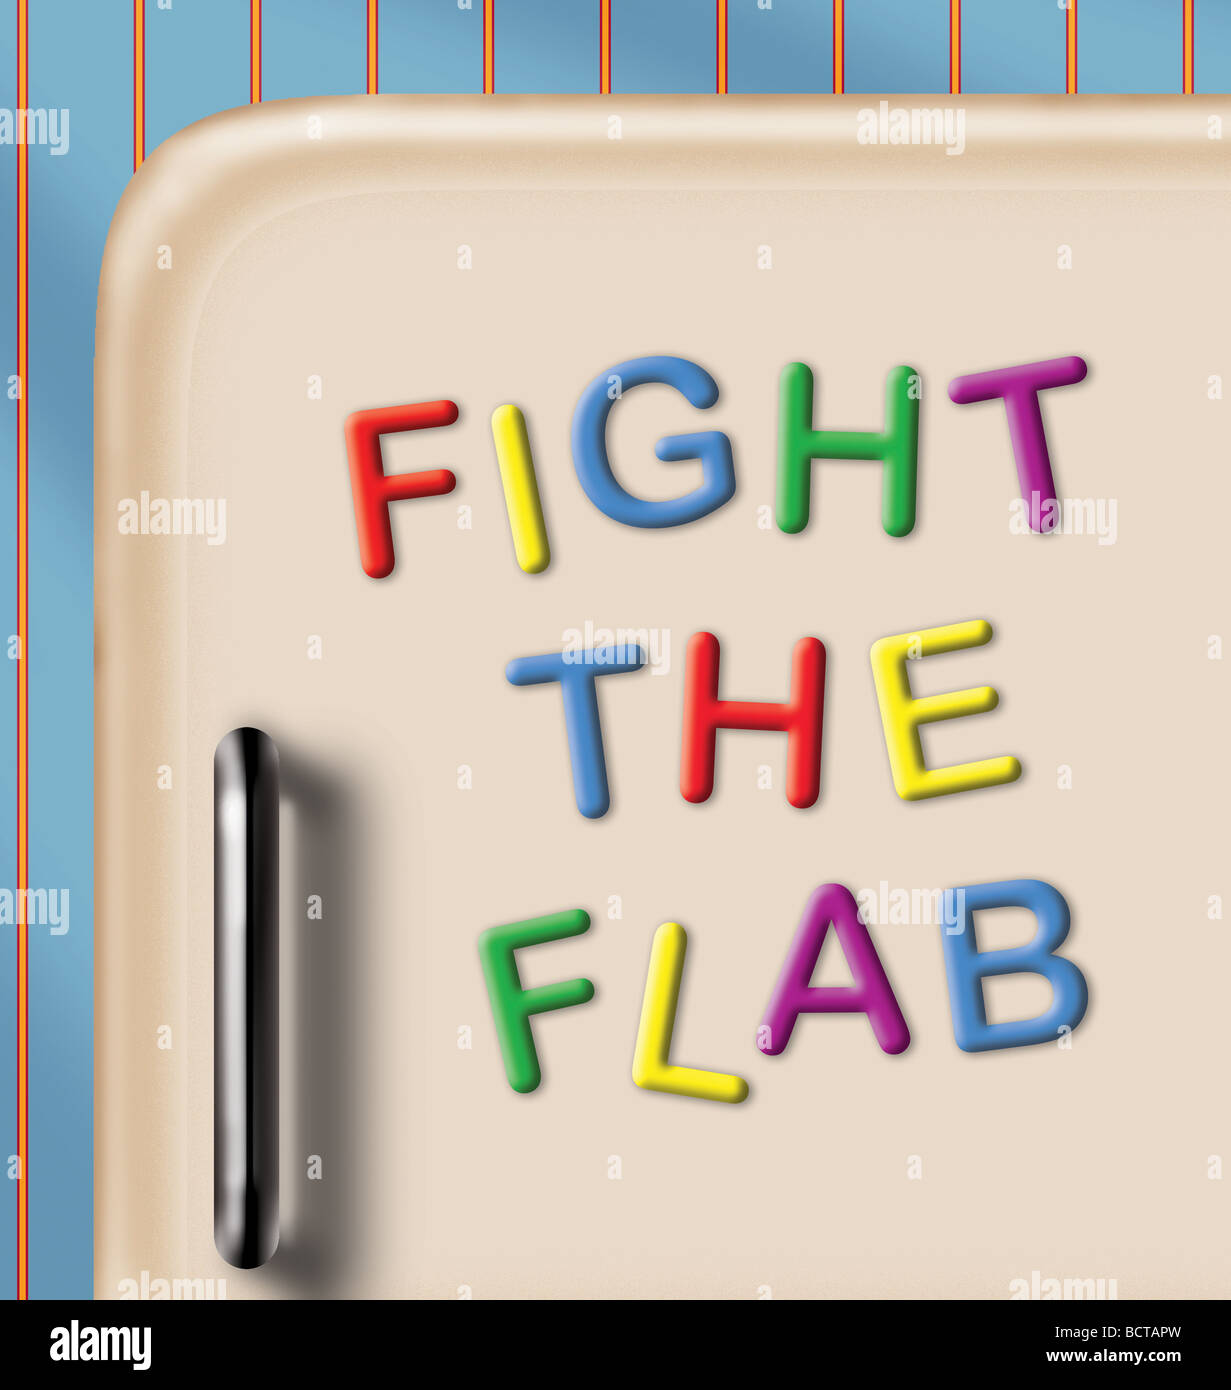 1950’s style fridge door with magnets making slogan ‘FIGHT THE FLAB’ on wallpaper background. Stock Photo